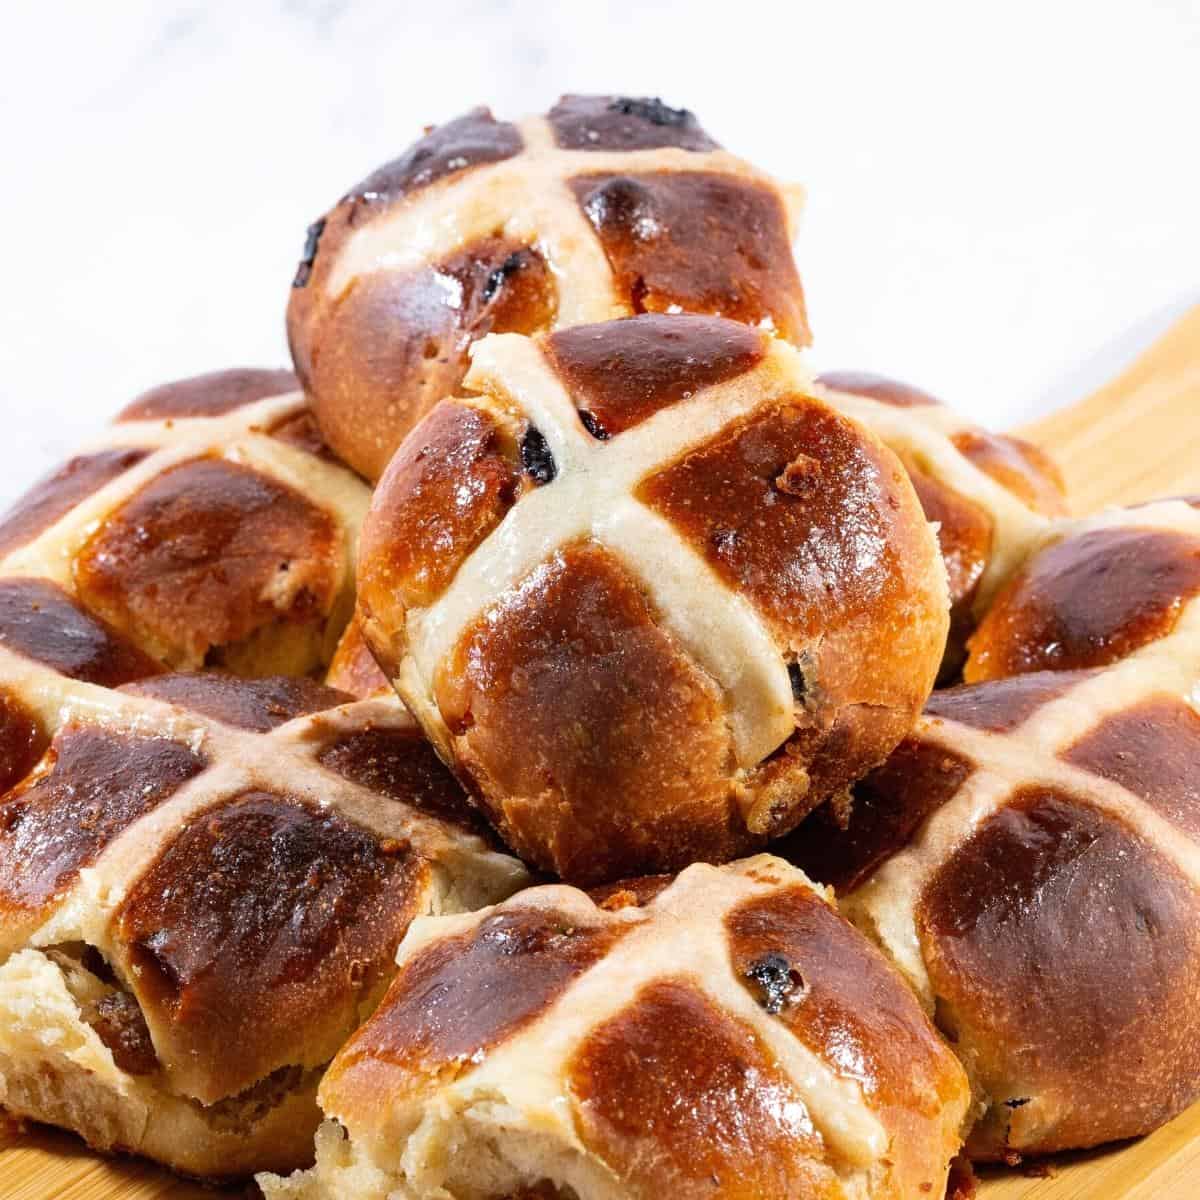 A stack of spiced buns with cross for Good Friday.